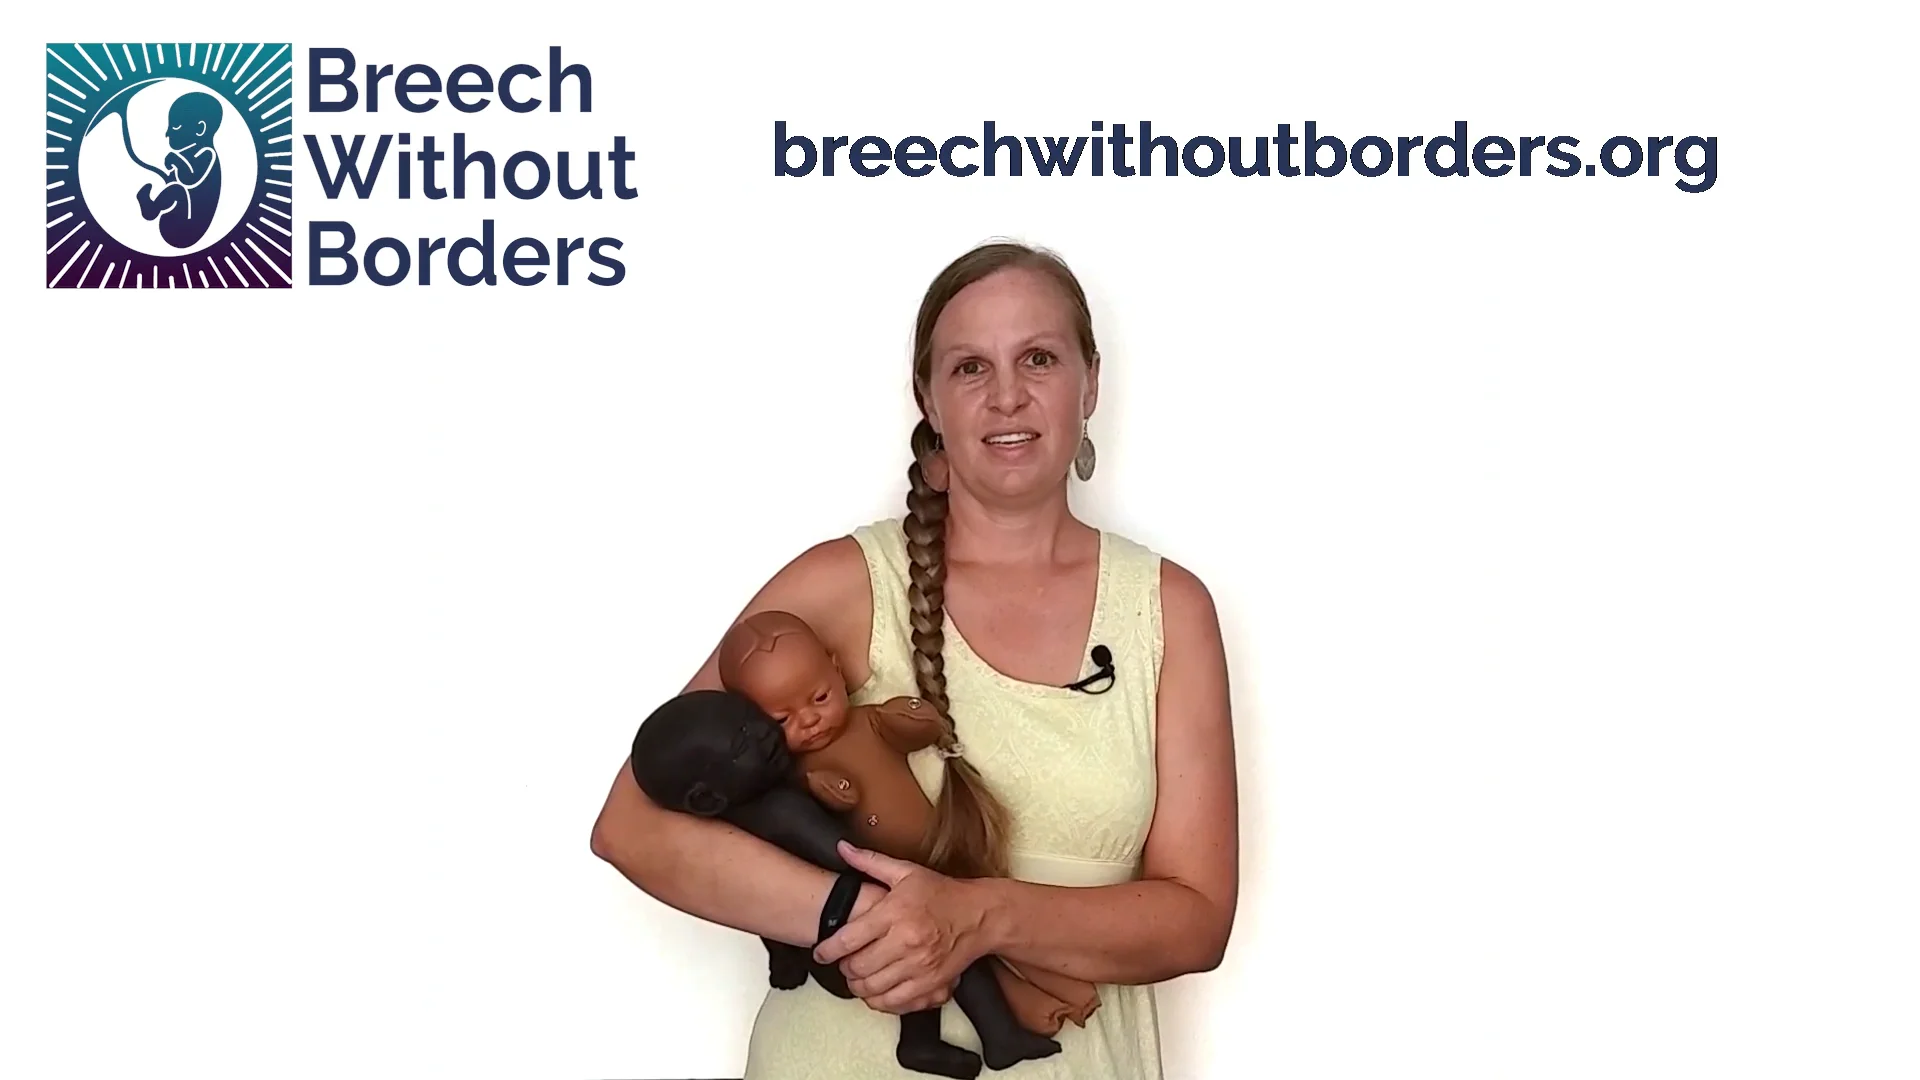 Breech Without Borders